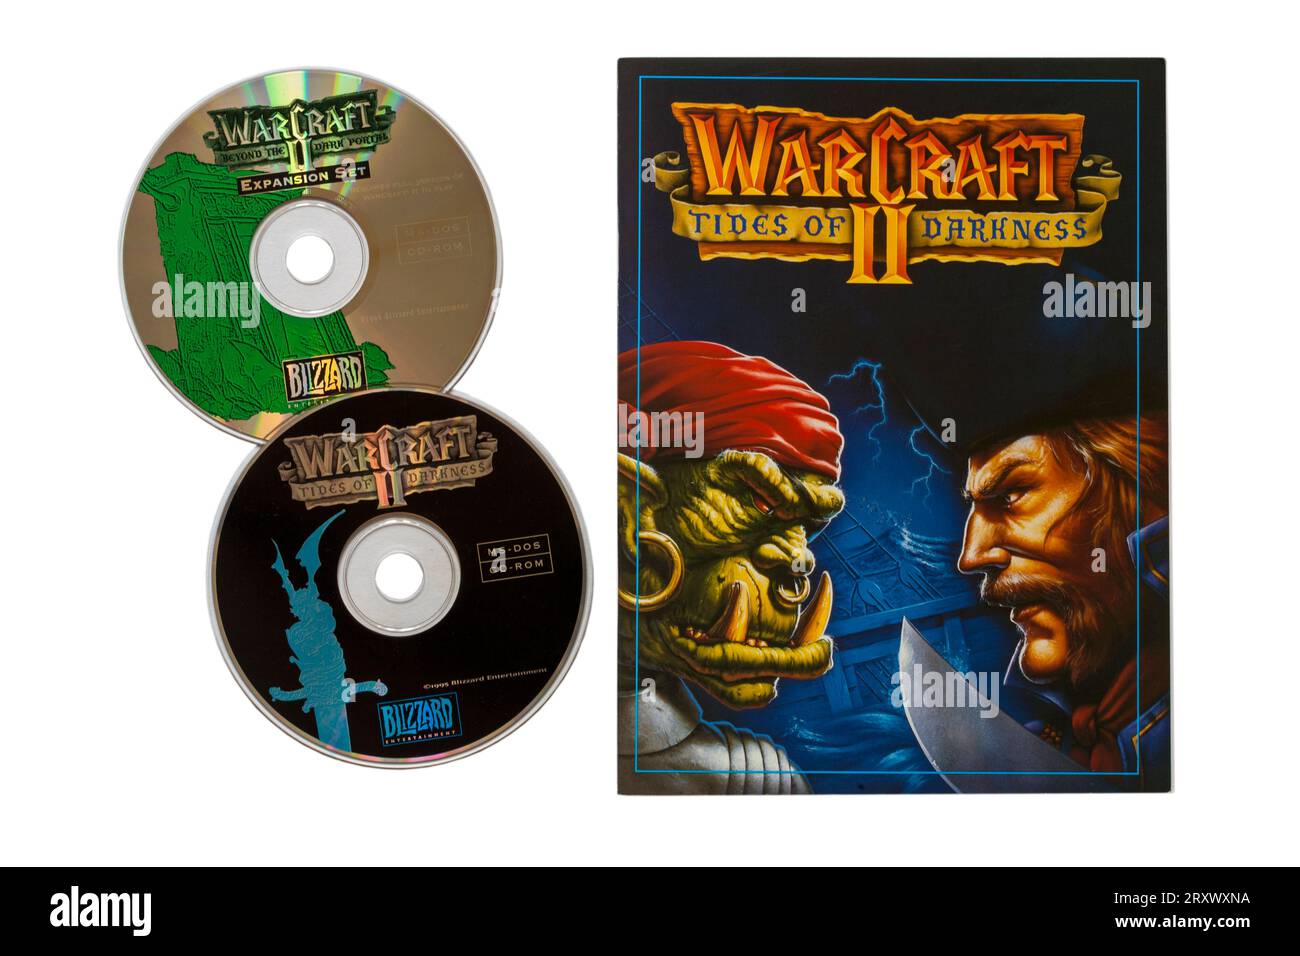 Warcraft II Tides of Darkness deluxe-edition computer game, book and discs isolated on white background Stock Photo